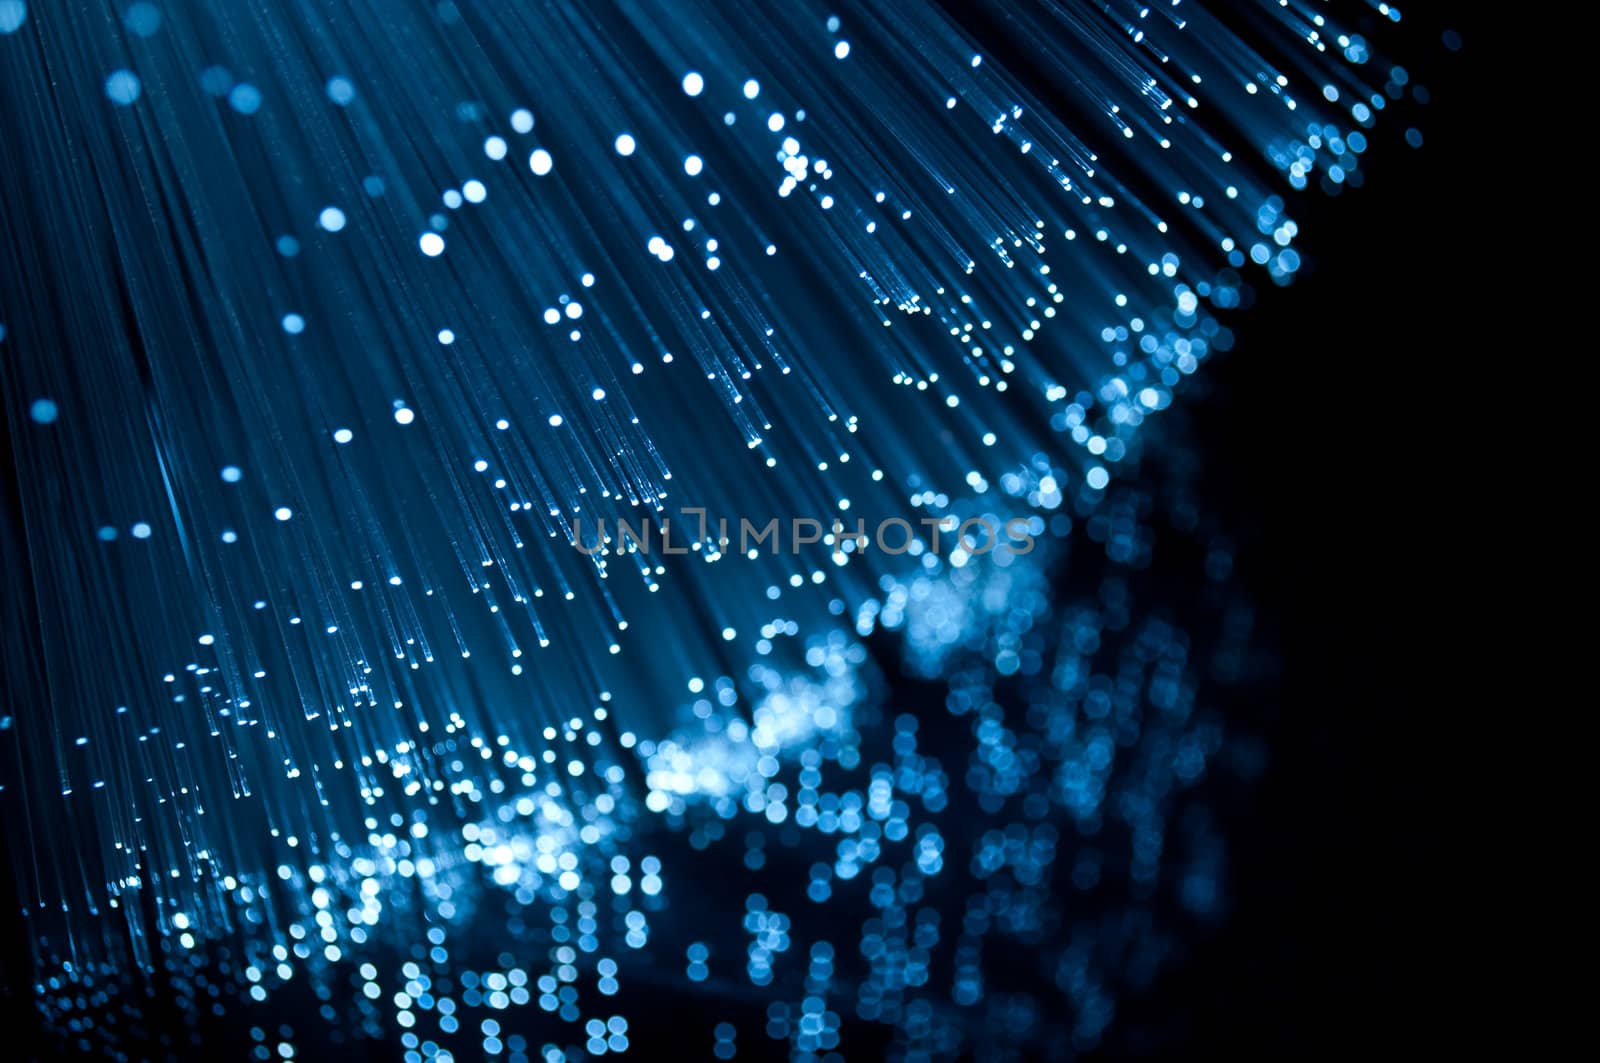 Fibre optics and reflections. by 72soul